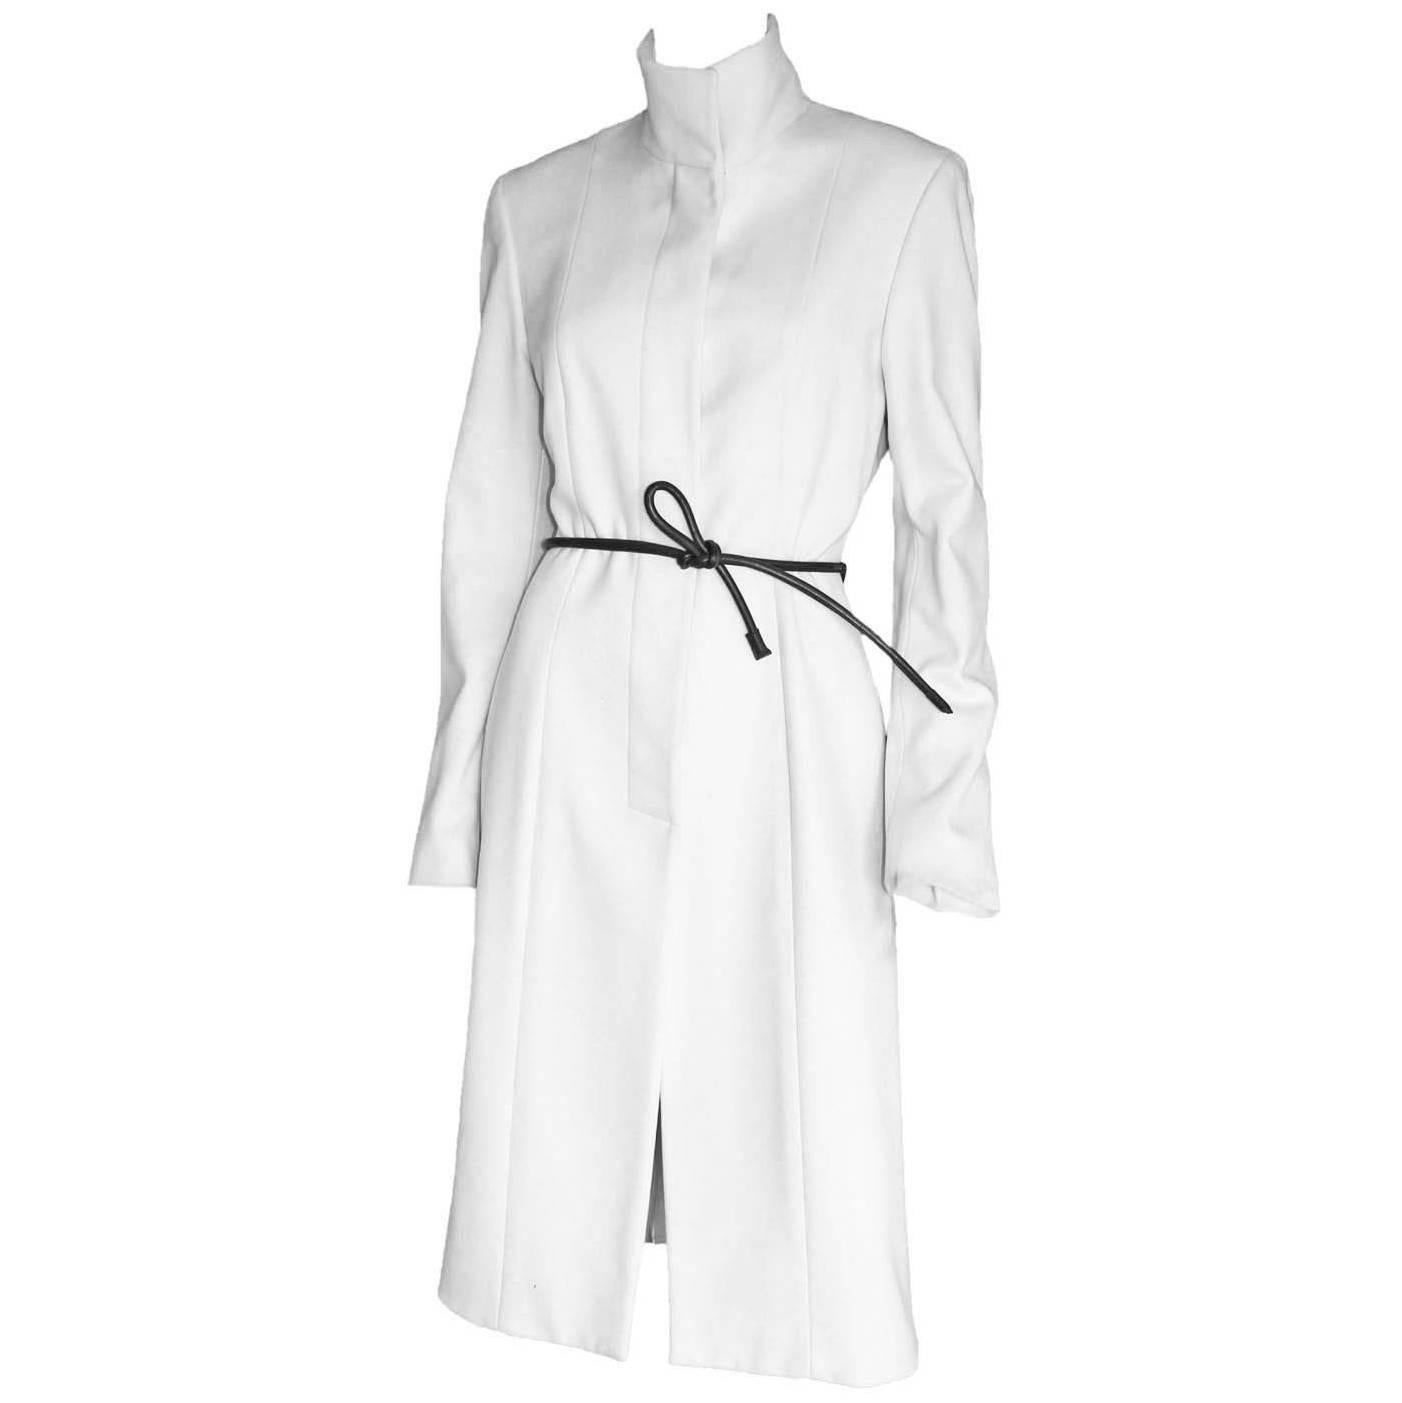 The Most Heavenly Tom Ford Gucci FW 1999 White Cashmere Belted Runway Coat! 44